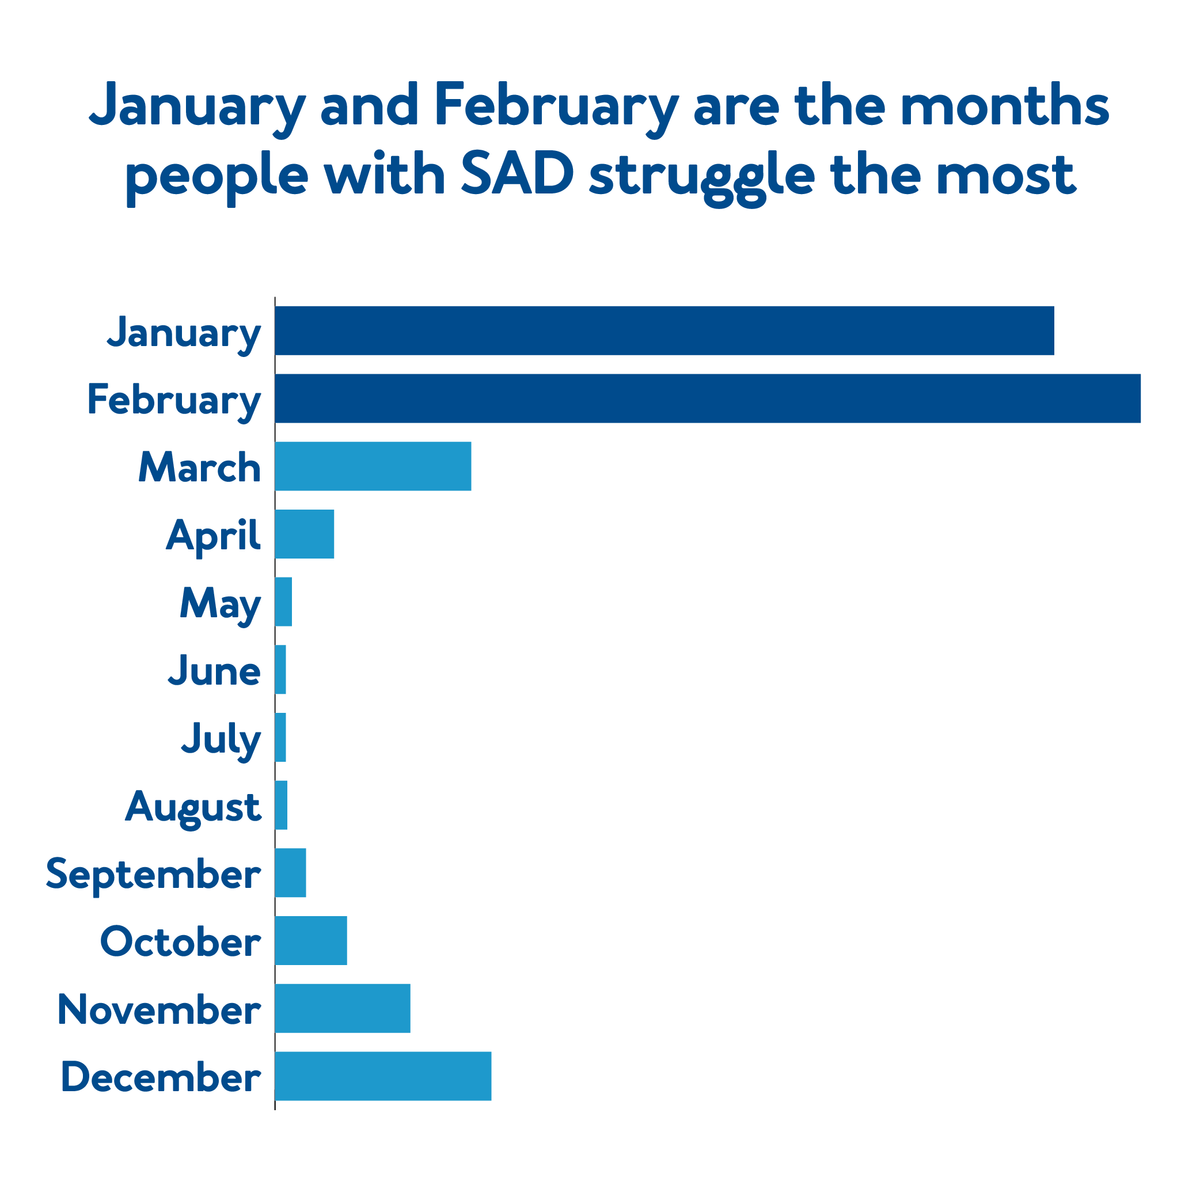 January and February are the months people with SAD struggle the most throughout the most